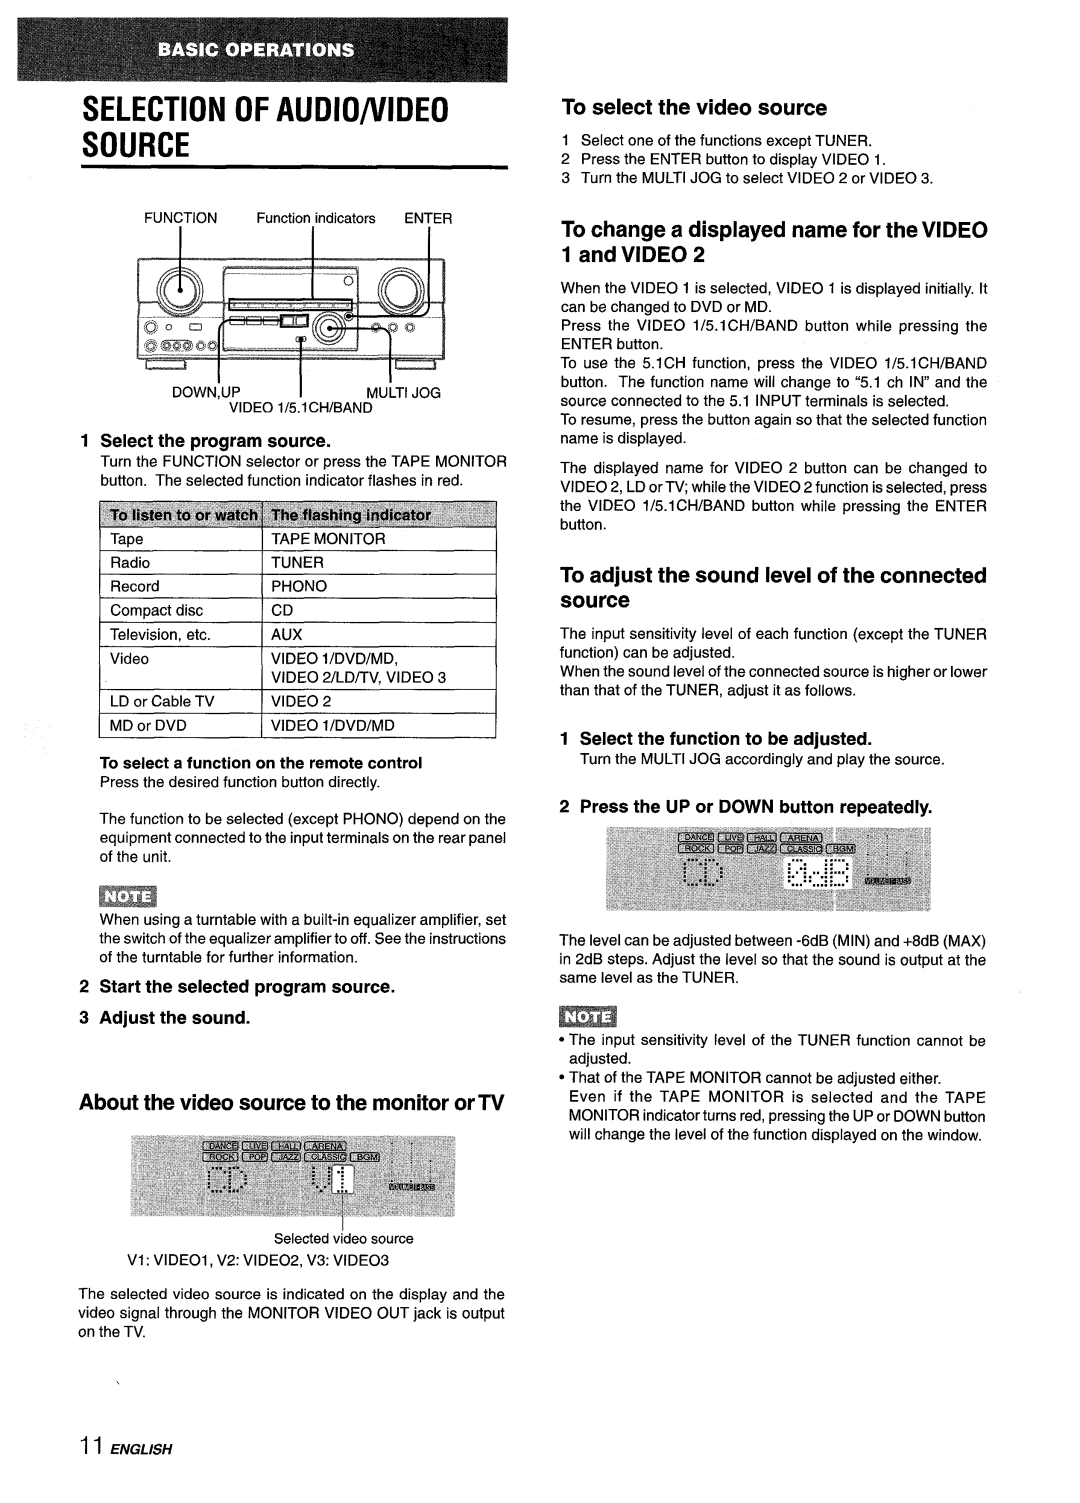 Aiwa AV-D35 manual Selection Of Audio/Video Source, About the video source to the monitor orTV, To select the video source 